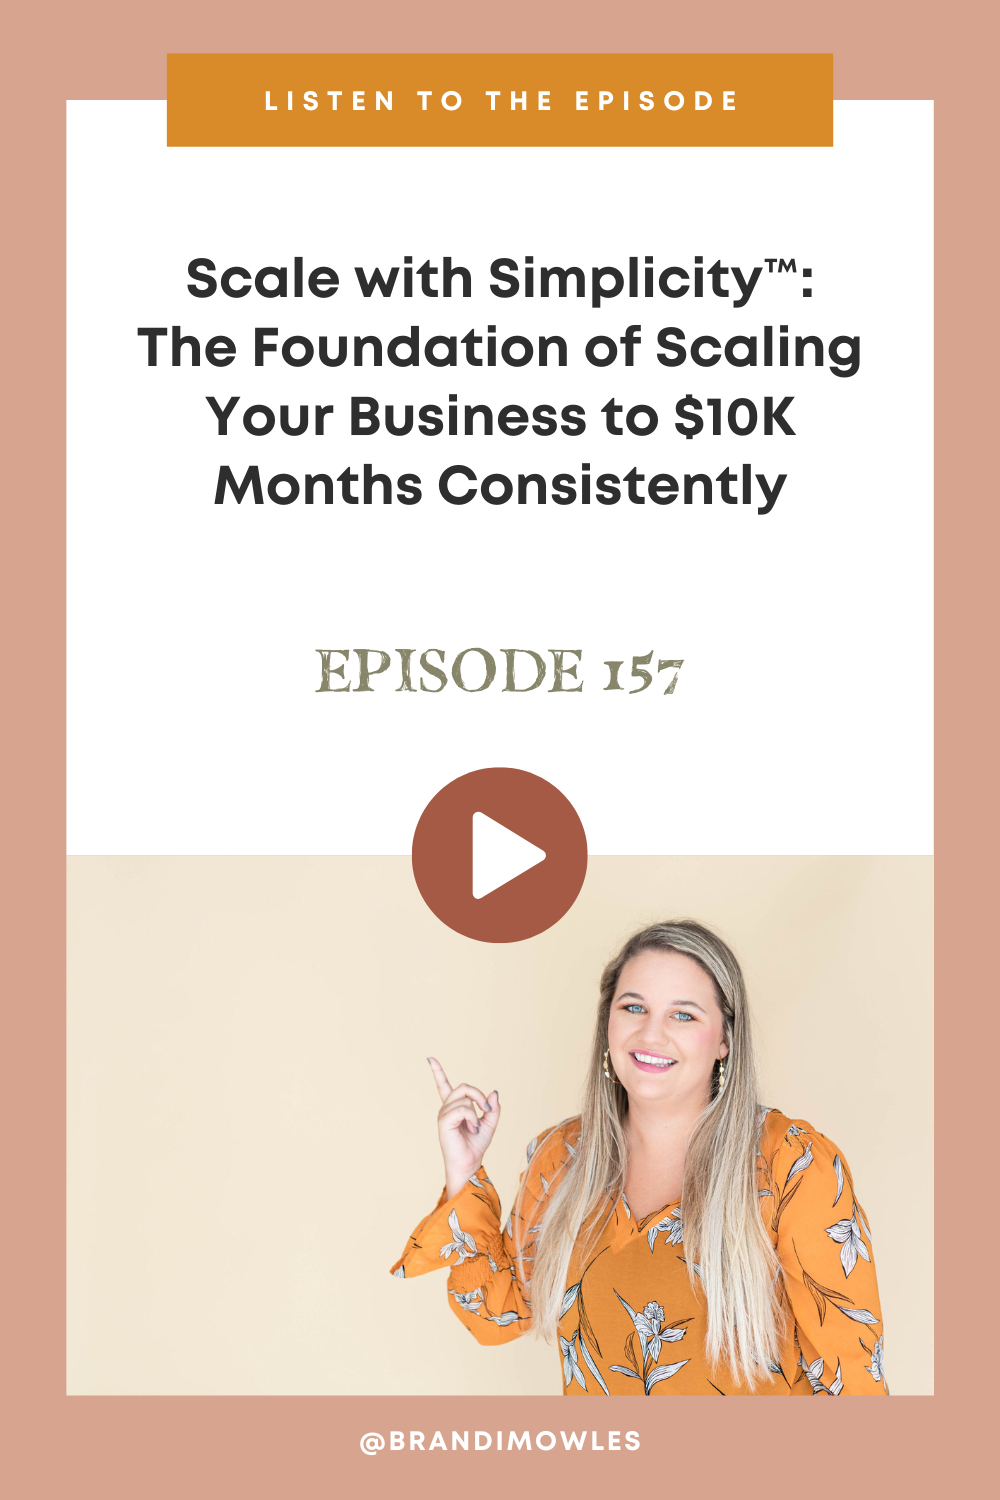 Brandi Mowles podcast episode feature about scaling your business